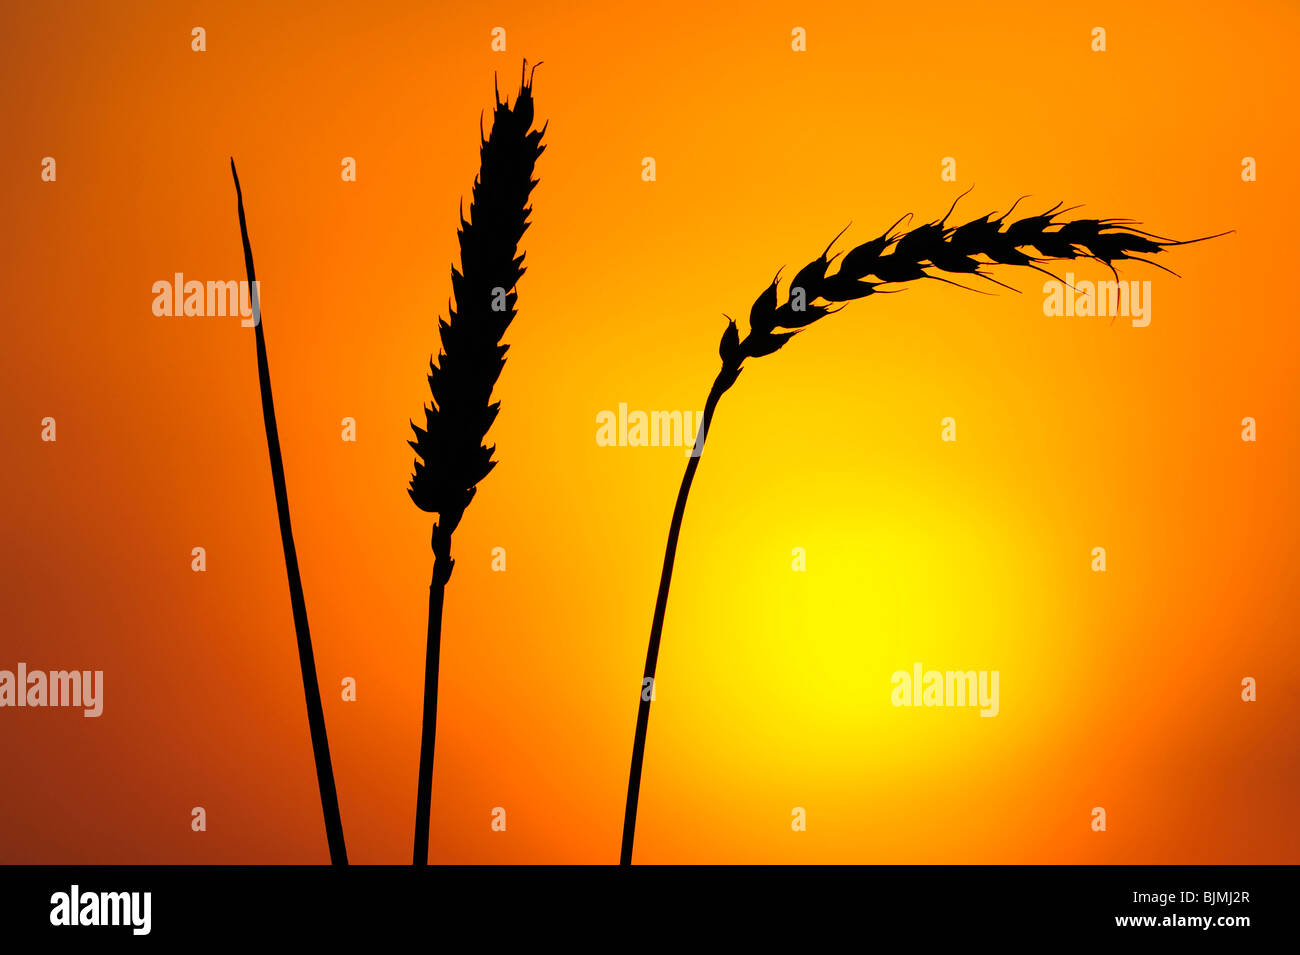 Ears of wheat in front of the sun Stock Photo